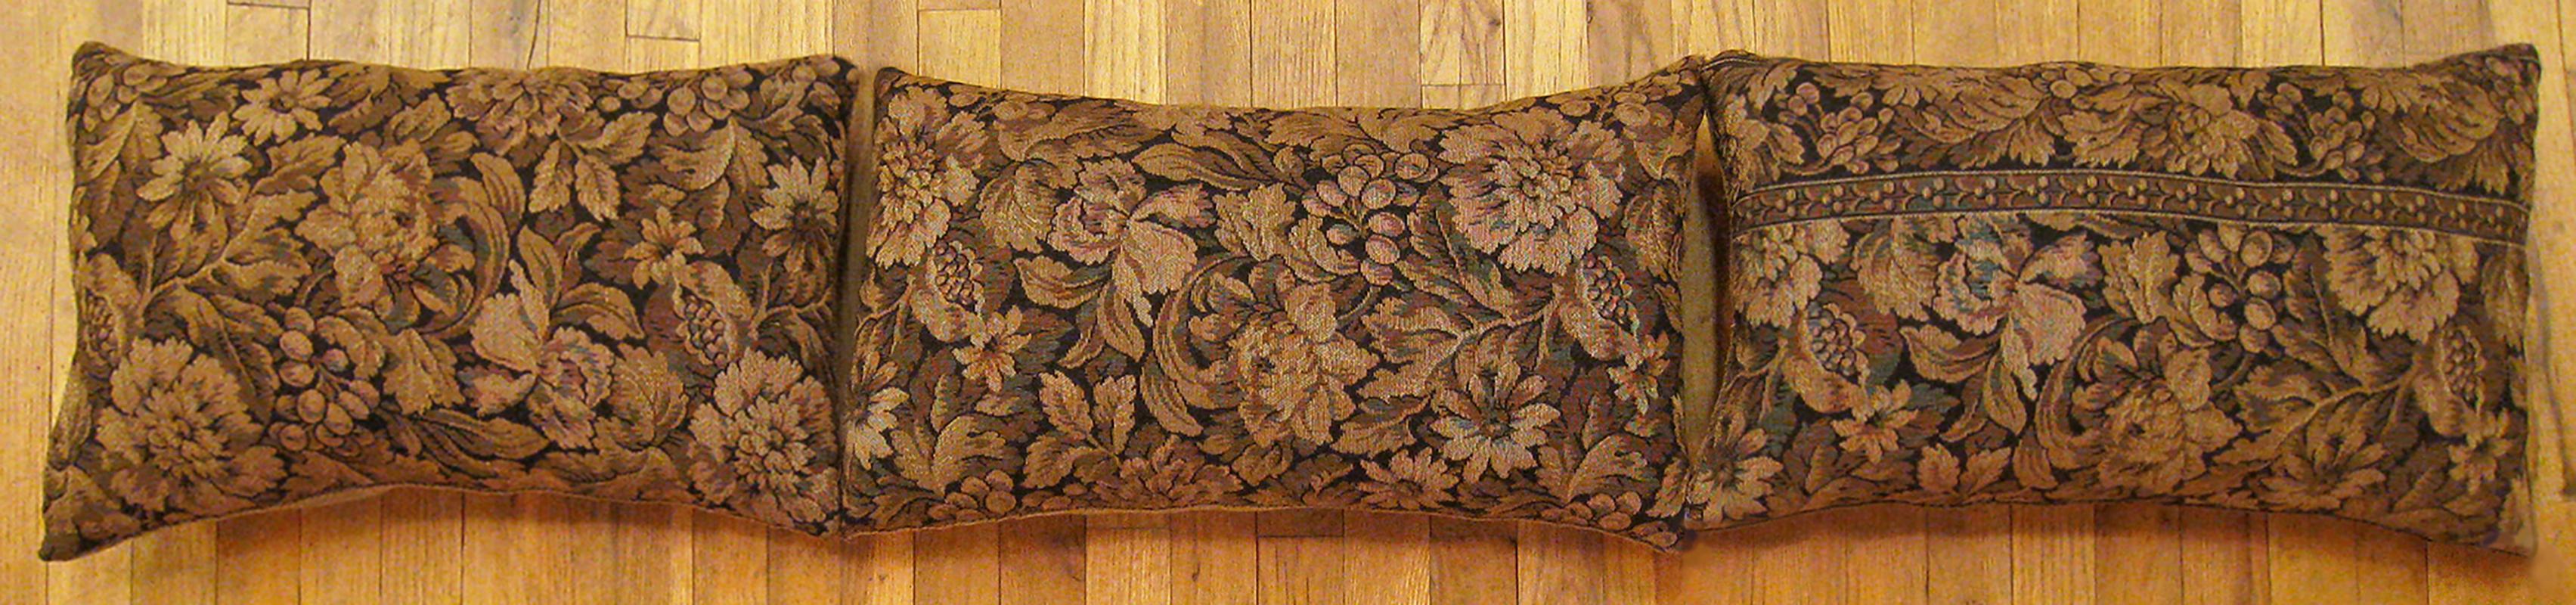 A set of antique french tapestry pillows ; size 24” x 14” (2’ 0” x 1’ 2”) each. 

An antique decorative pillows with floral elments allover a brown central field, size 24” x 14” (2’ 0” x 1’ 2”) each. This lovely decorative pillow features an